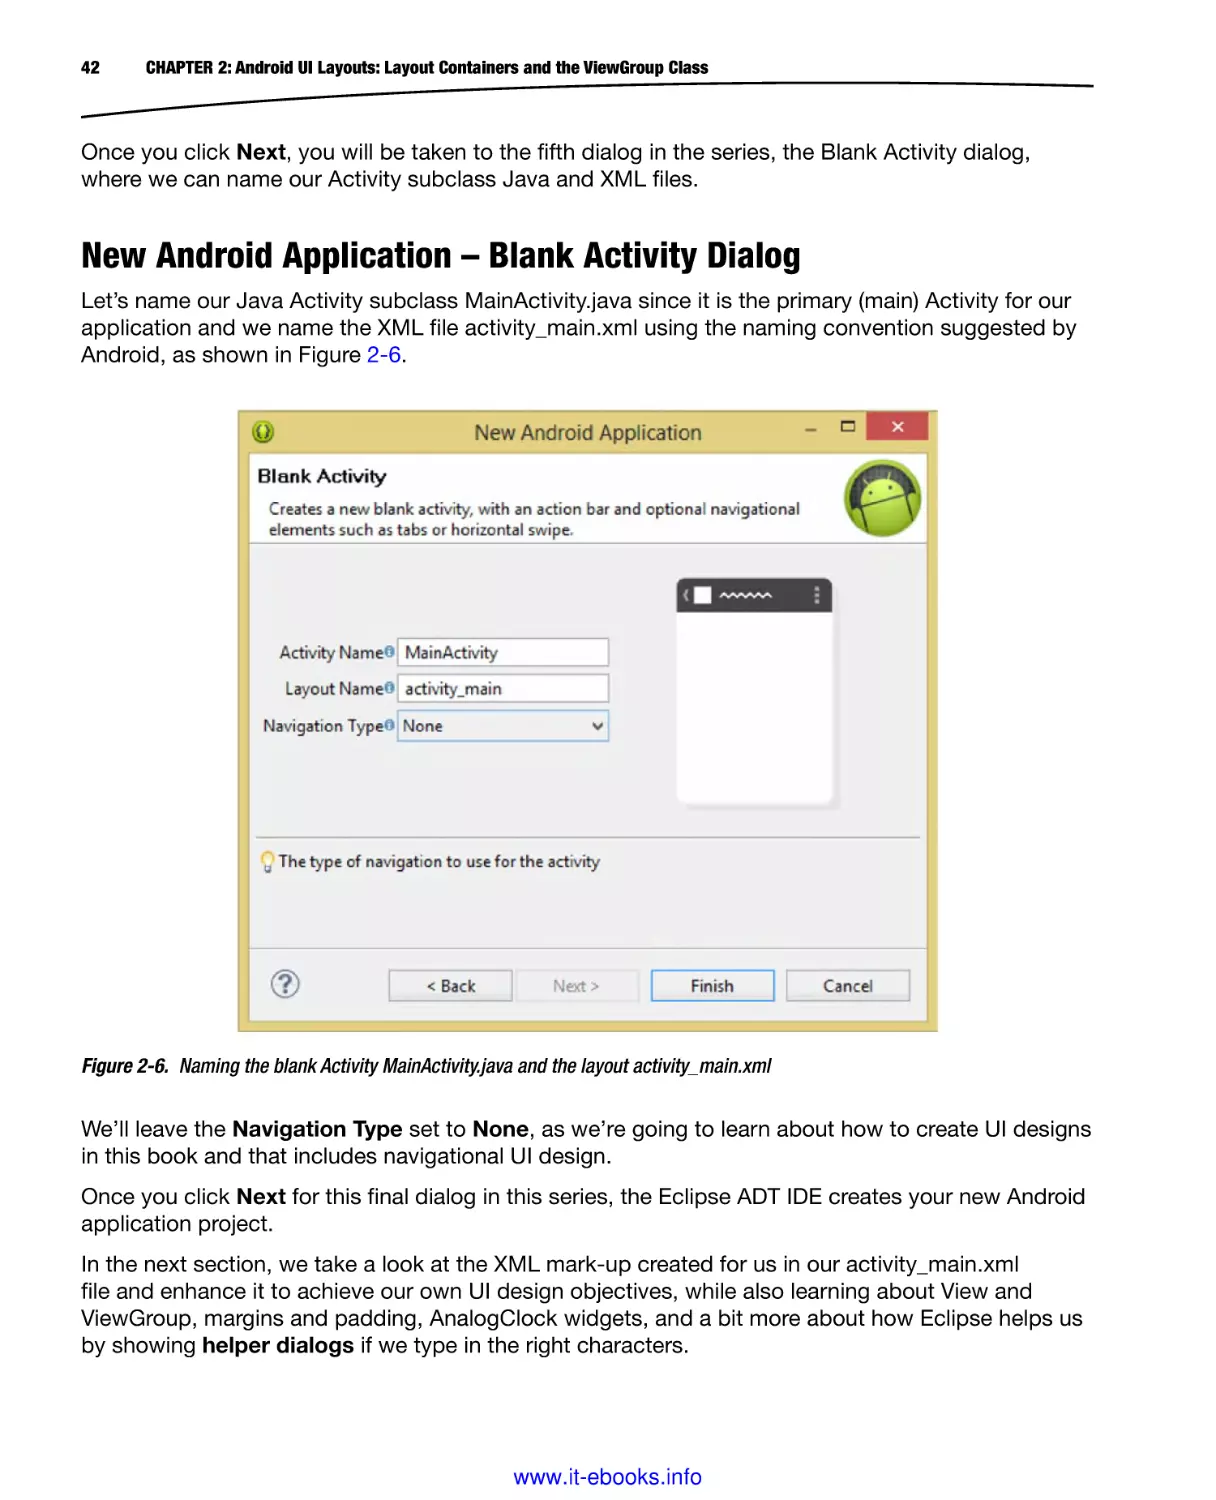 New Android Application – Blank Activity Dialog